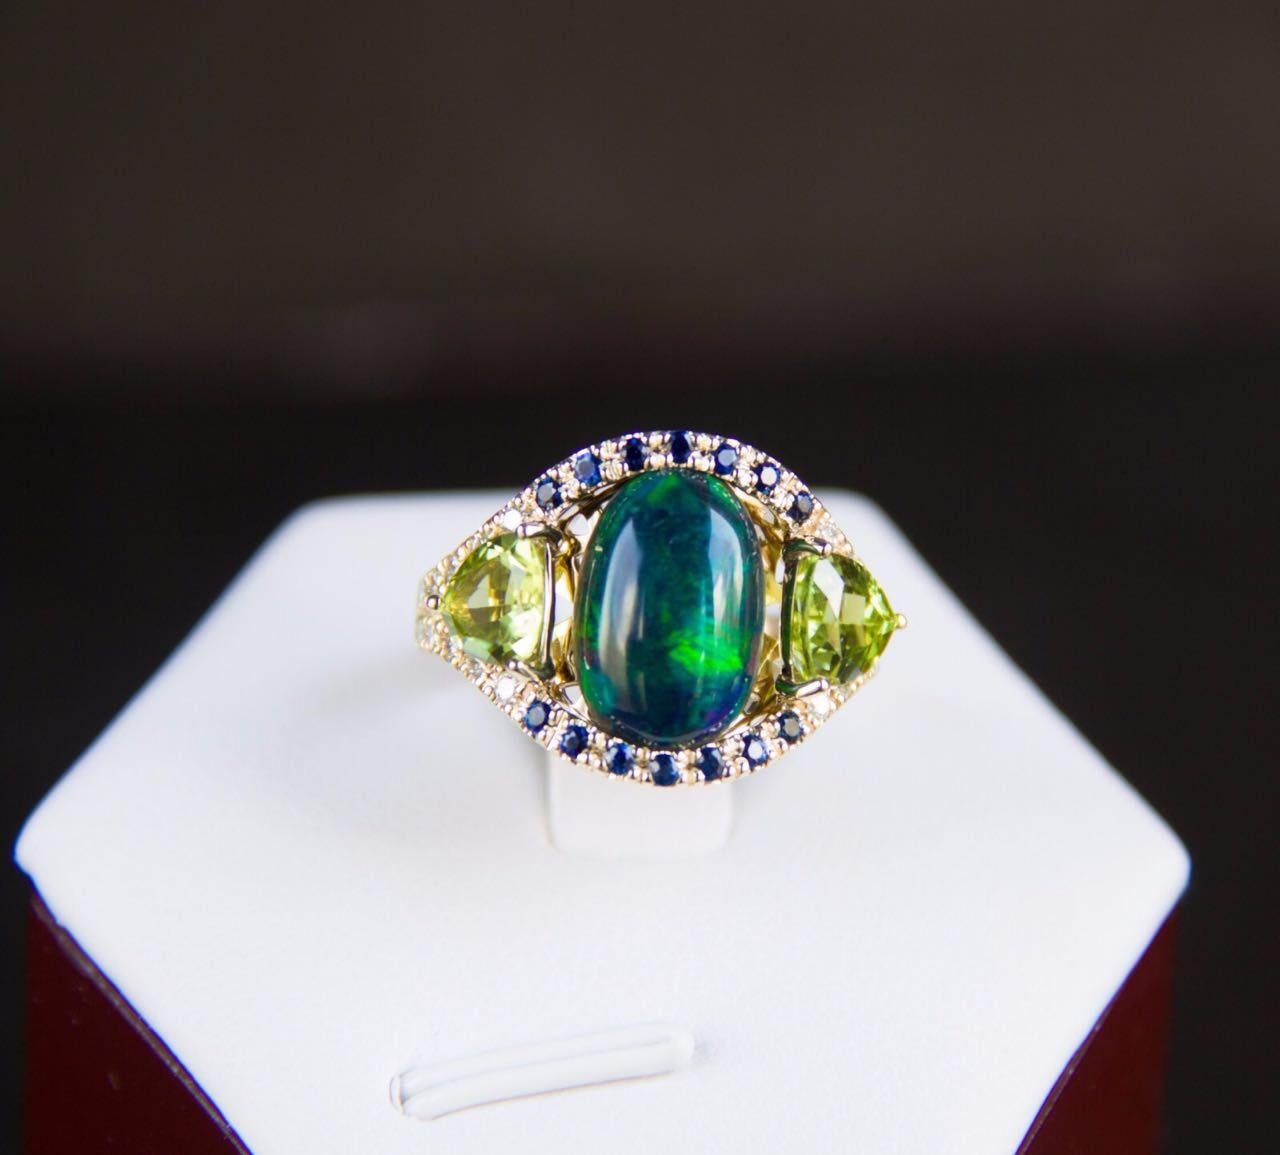 For Sale:  Black Opal, Sapphires, Peridots, Diamonds 14k Gold Ring, Genuine Opal Ring 6